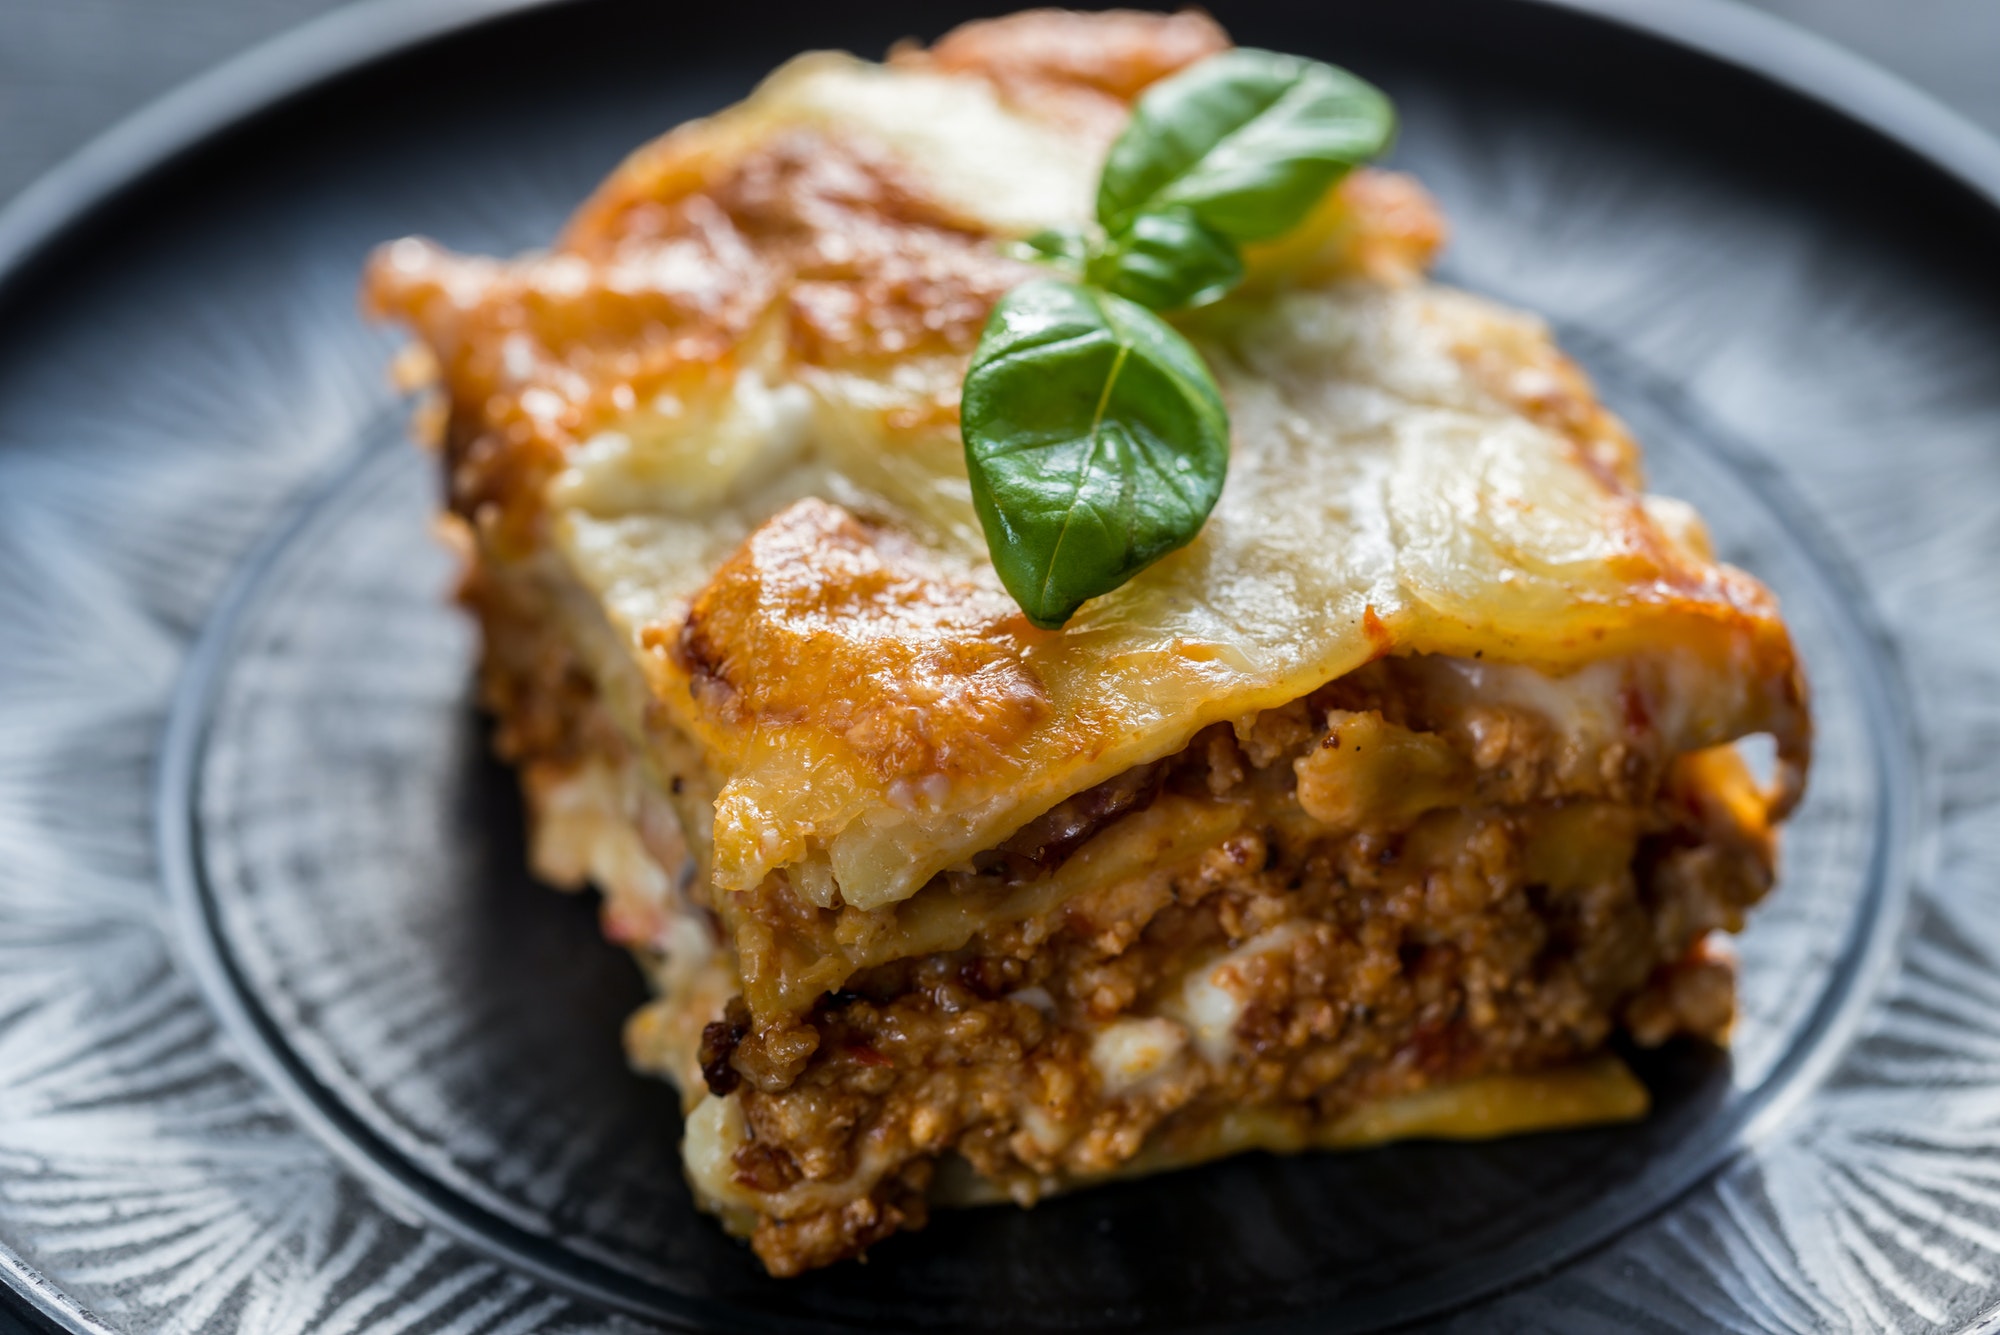 PickFu Mother's Day poll: Lasagna was a favorite dish among many respondents